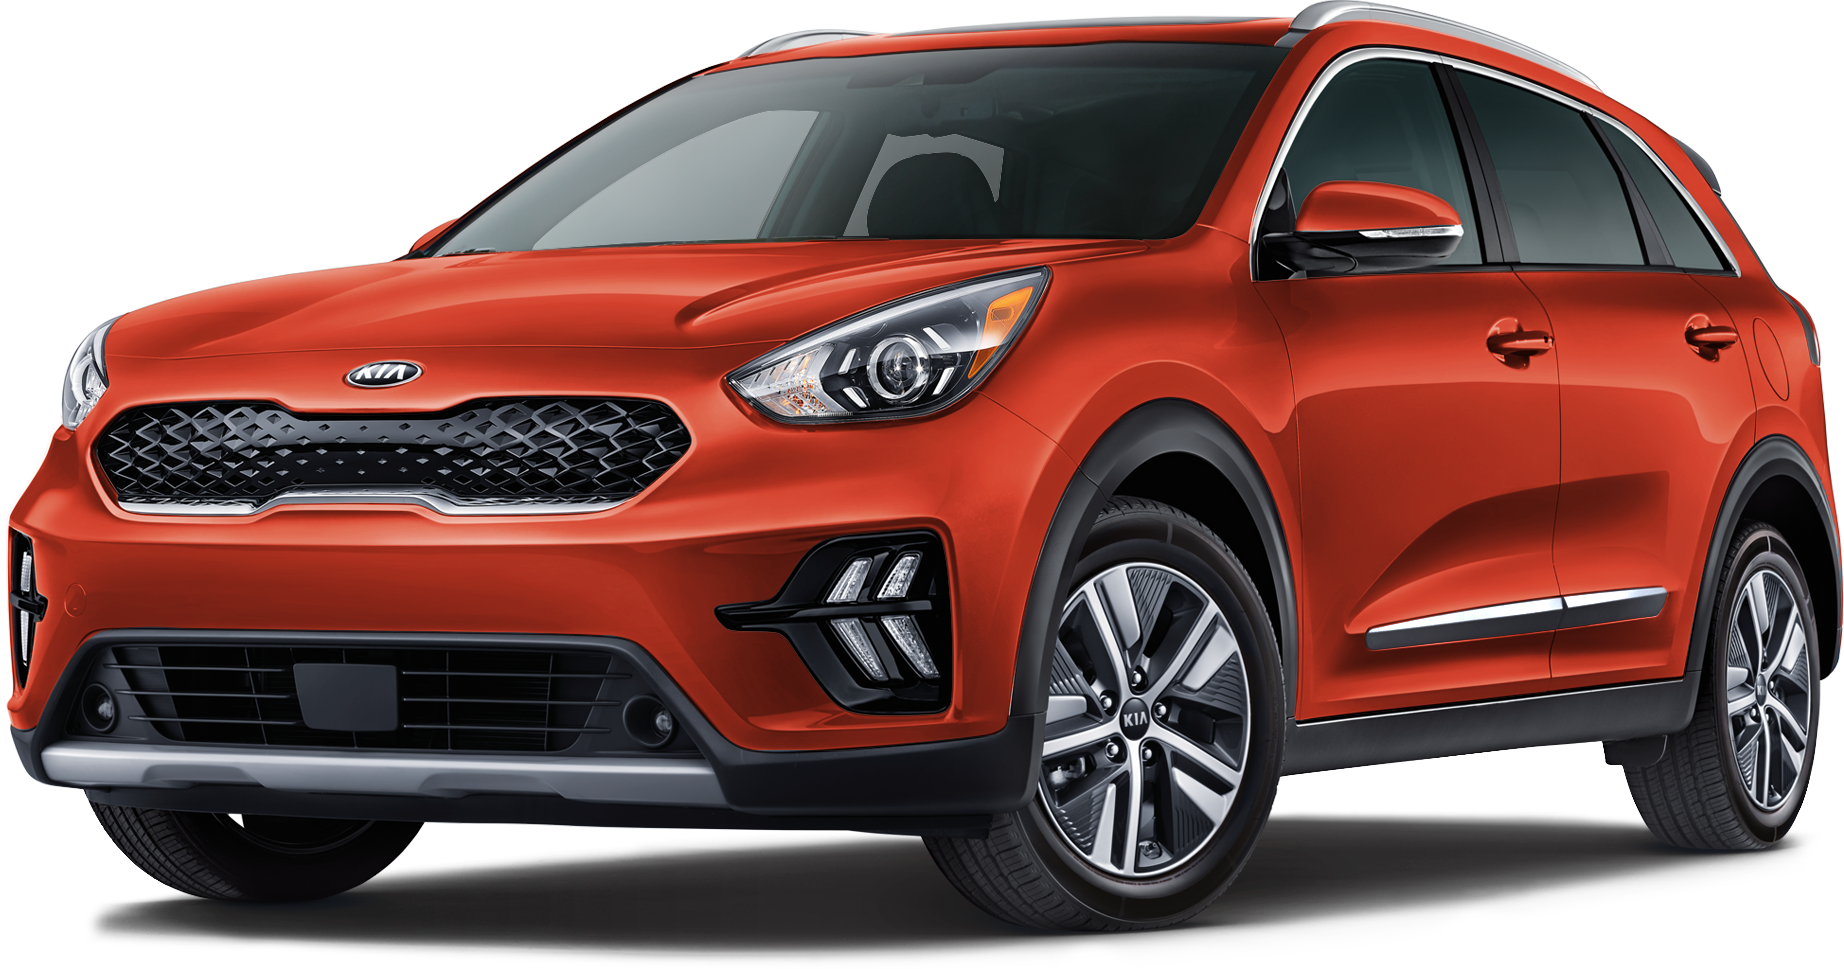 2020 Kia Niro Incentives, Specials & Offers in Orchard Park NY